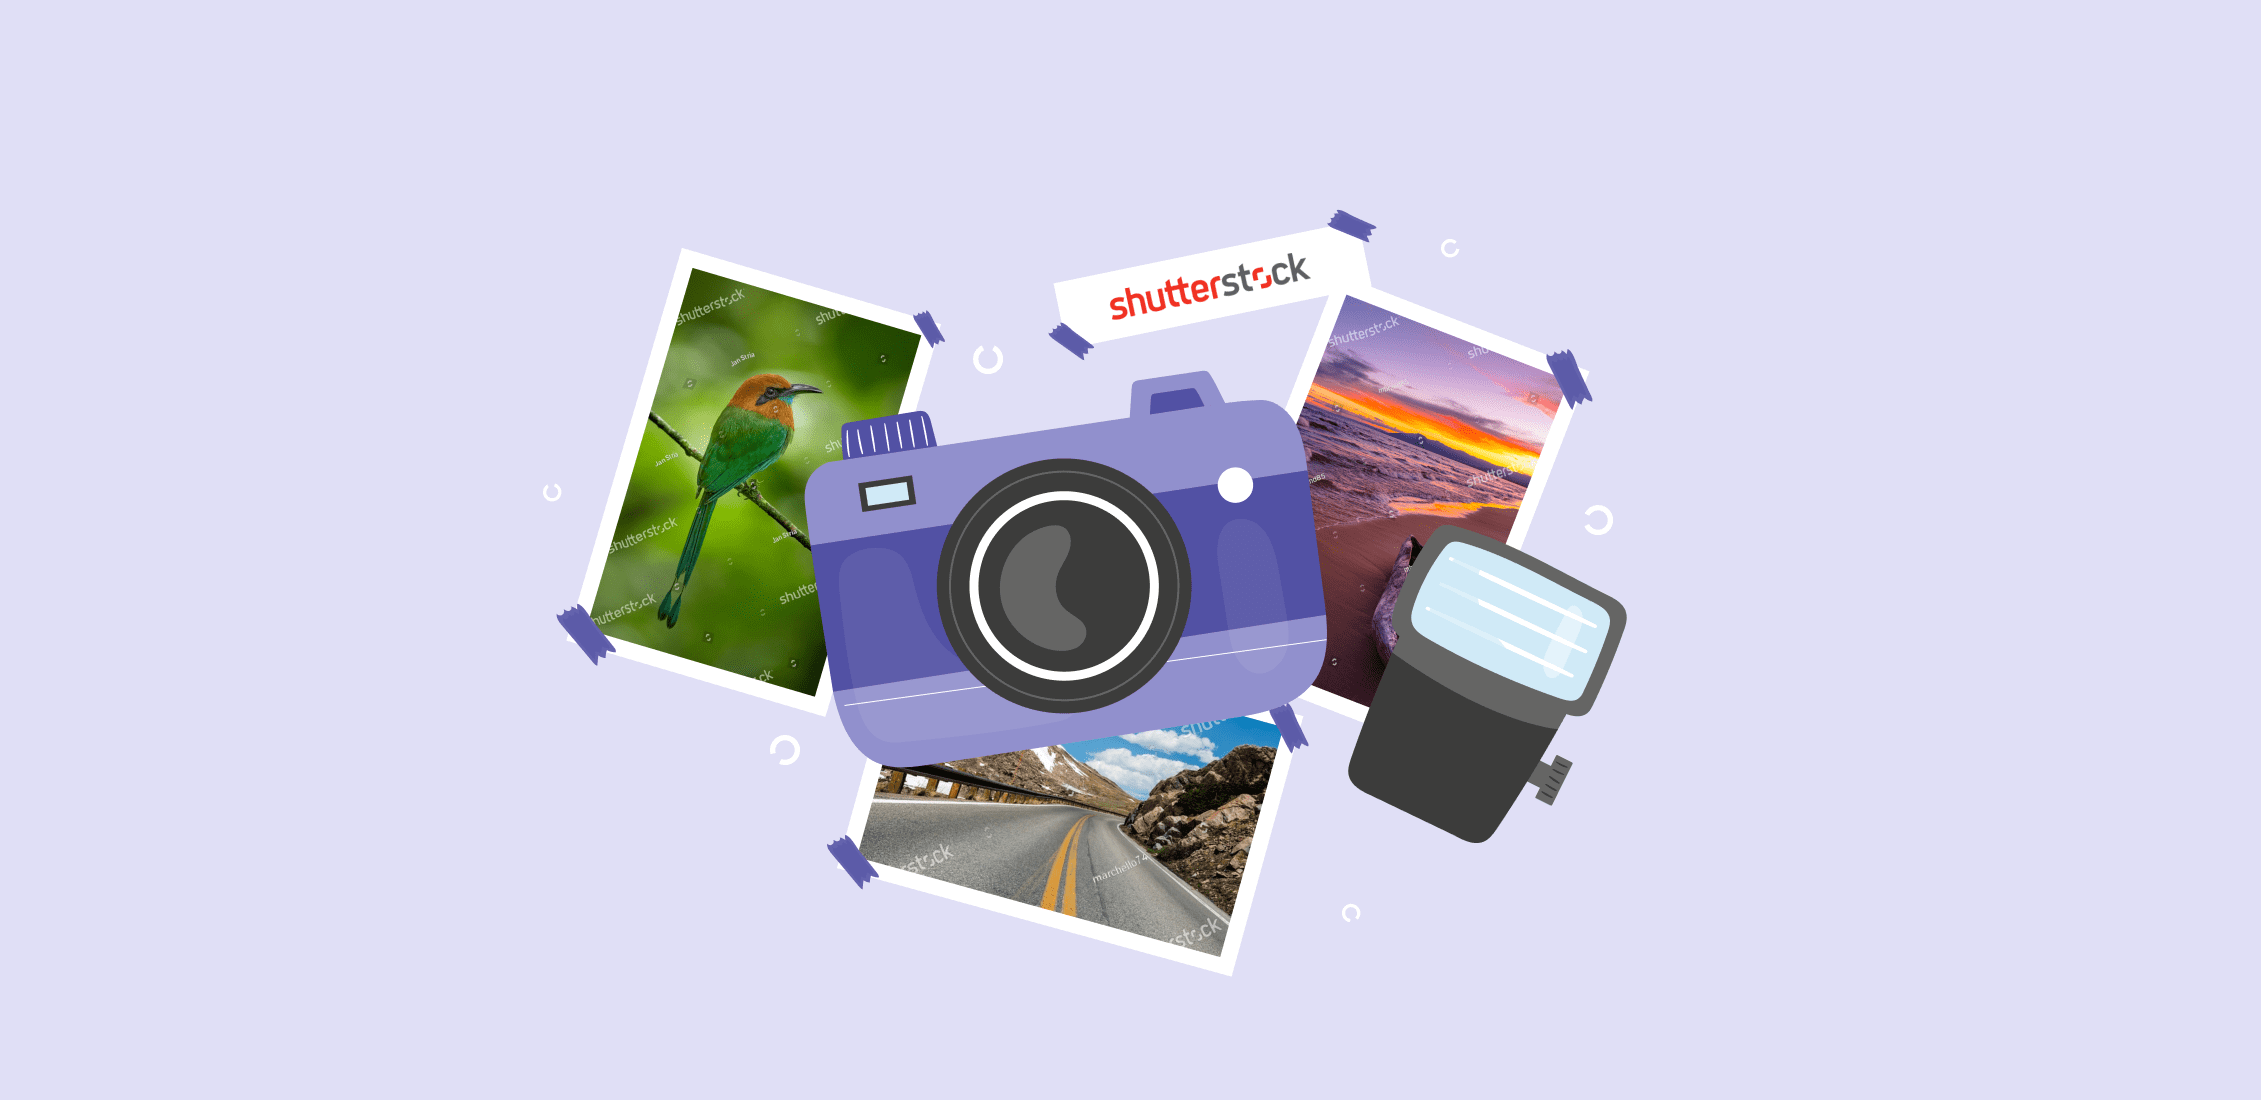 Camera and some pictures on a purple background.